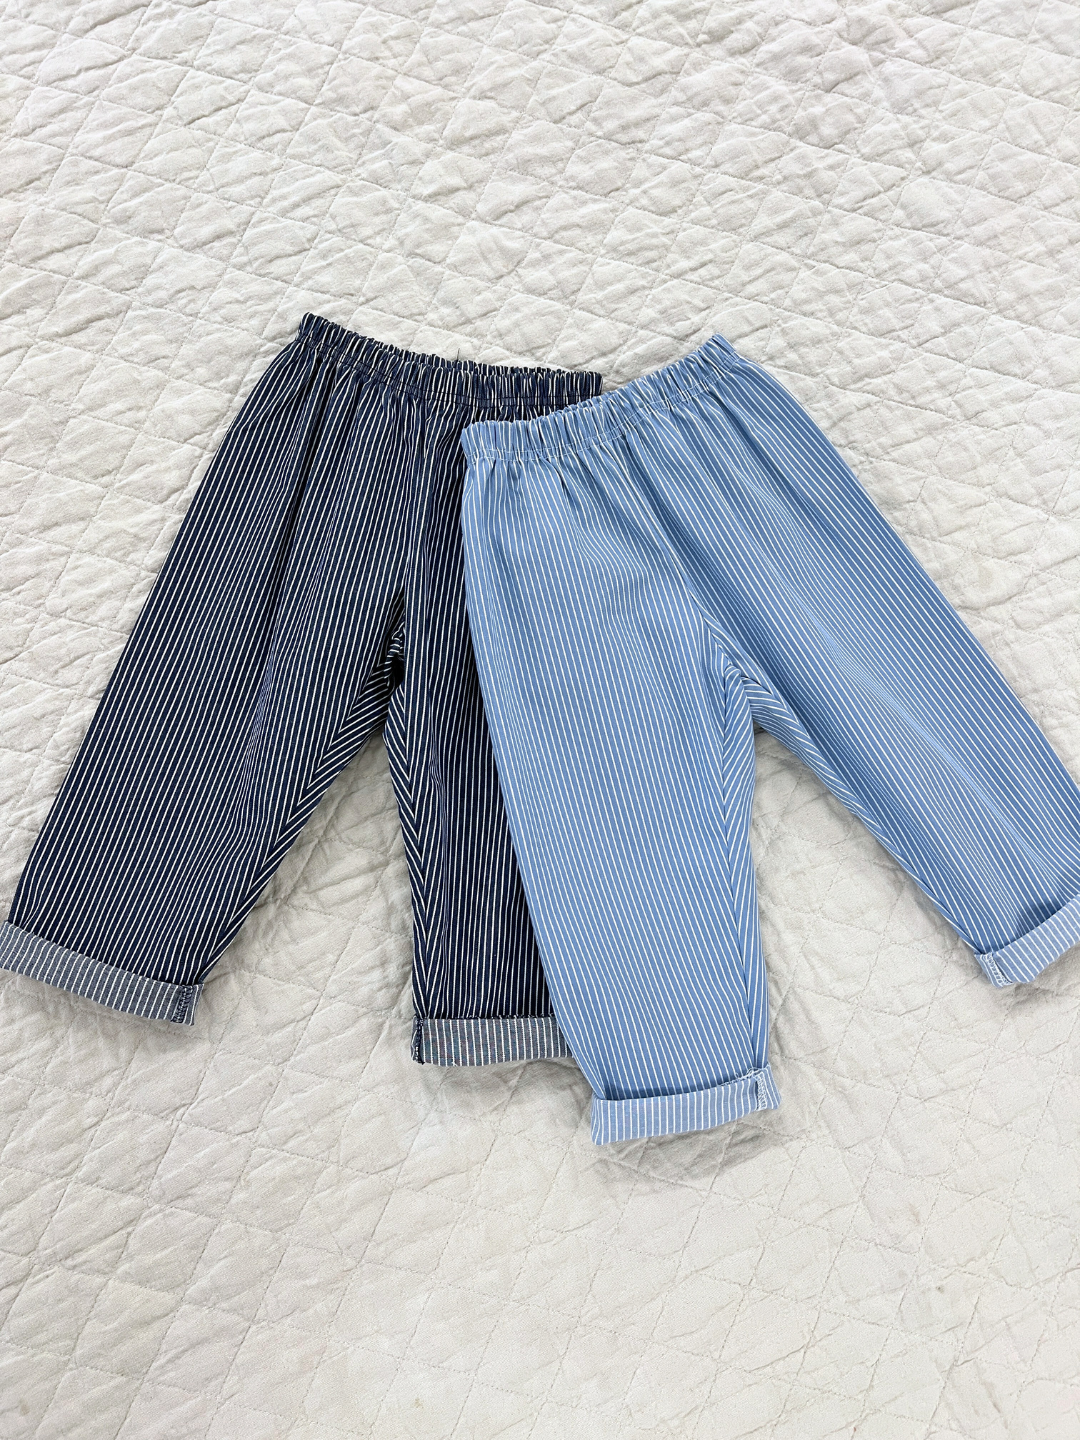 Two pairs of kids blue pants with narrow white vertical stripes, cuffed at the ankle. One is a lighter shade of blue, and one is darker blue. They are laid on a white canvas quilt.